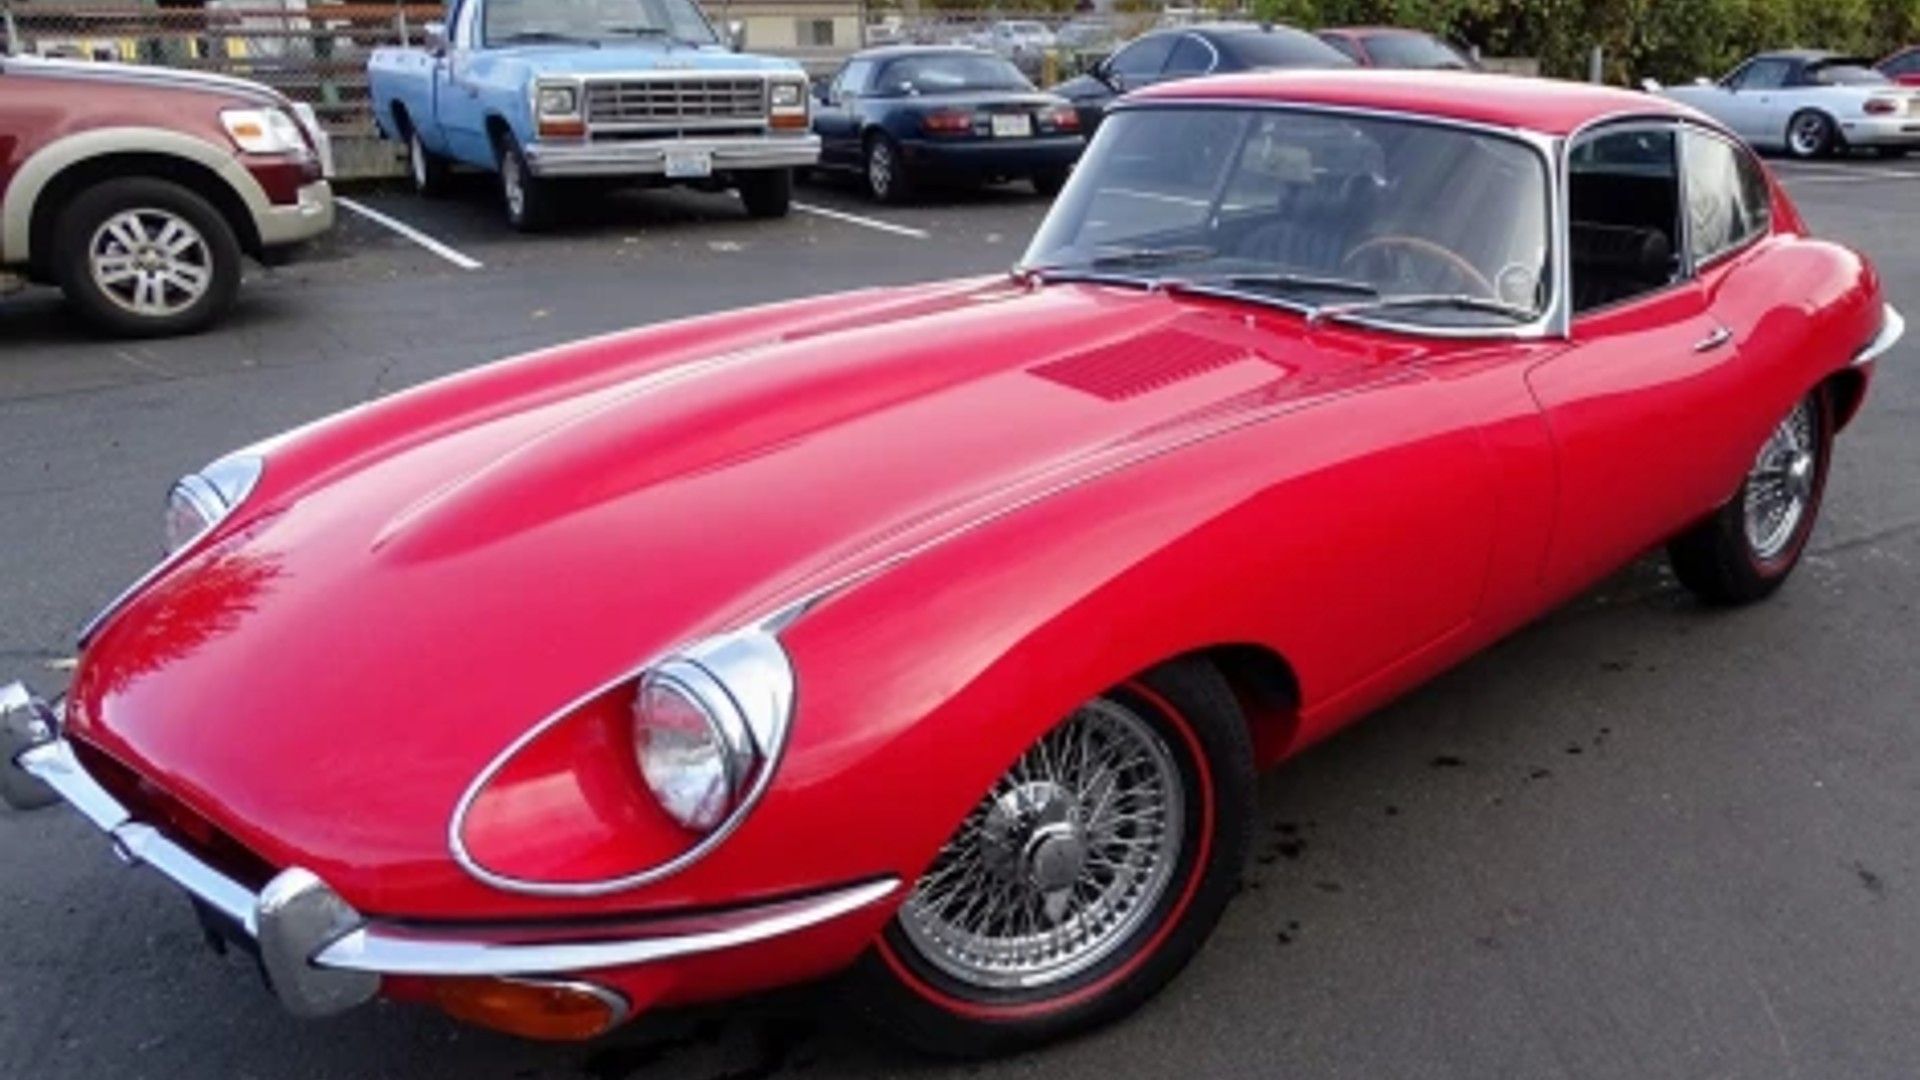 Driver's side profile of a red Jaguar E-Type Coupe.